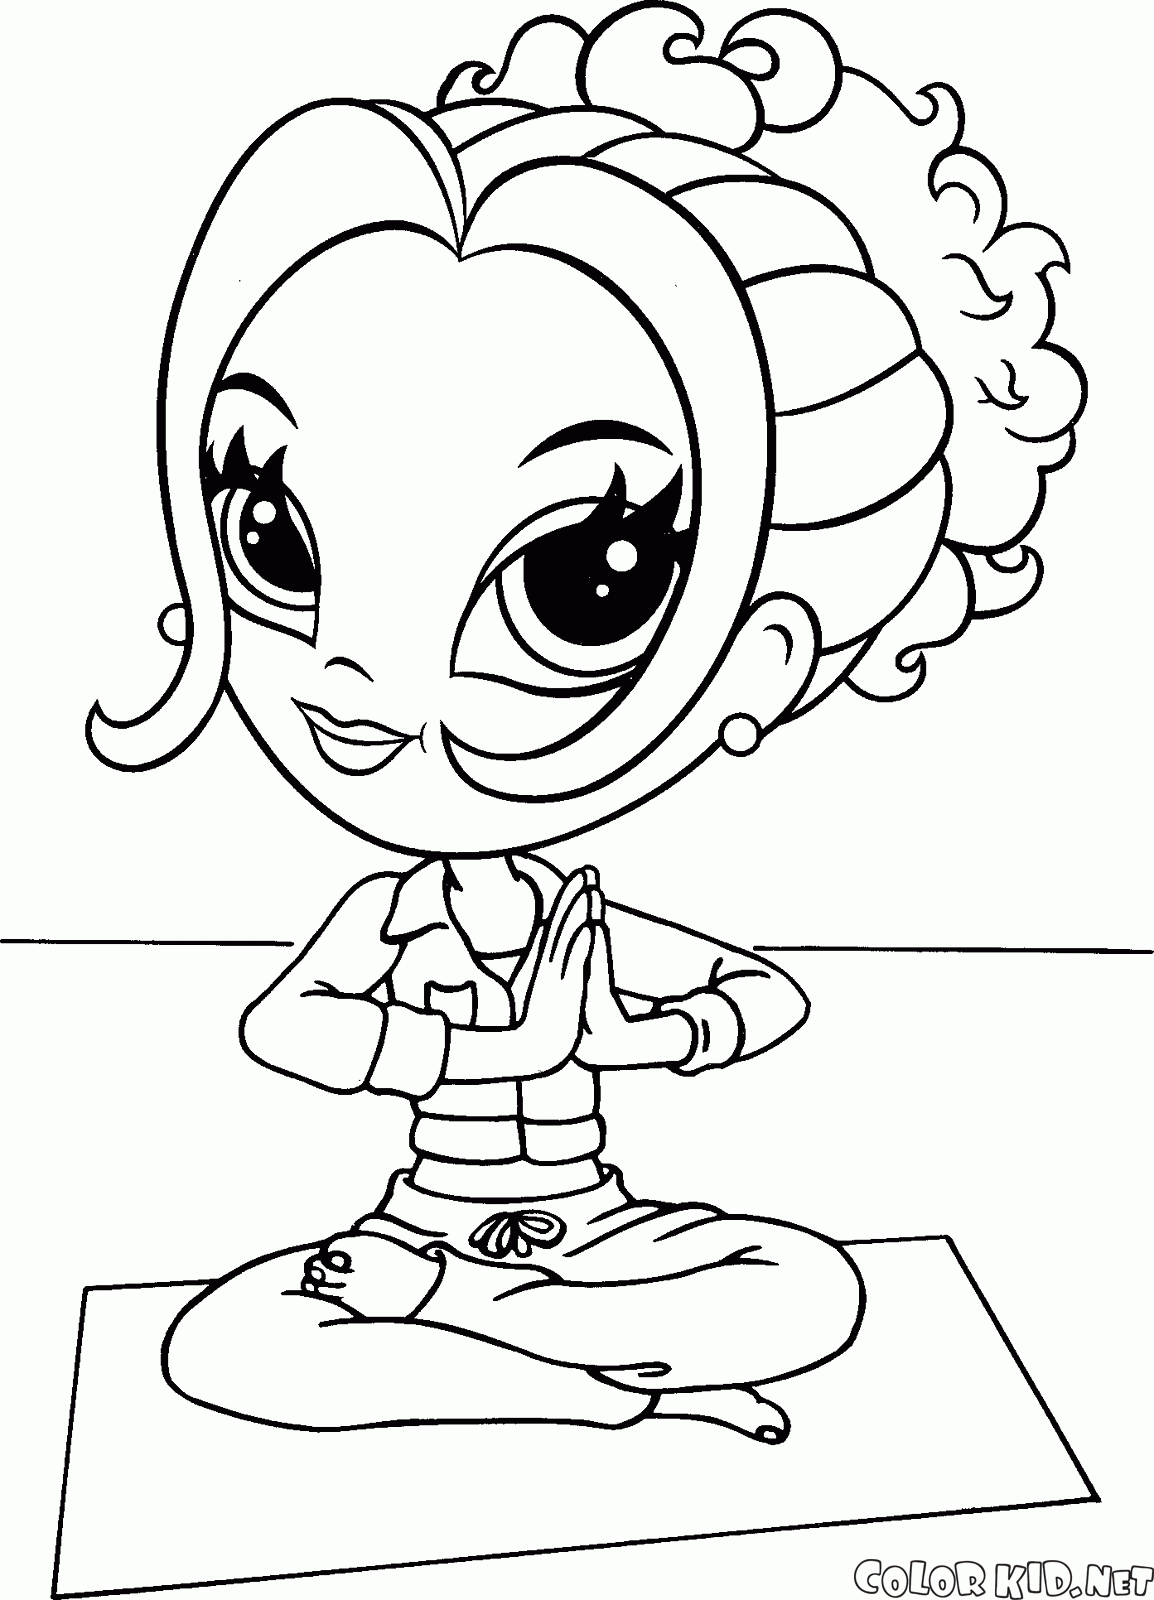 Coloring page - Girl on the yoga